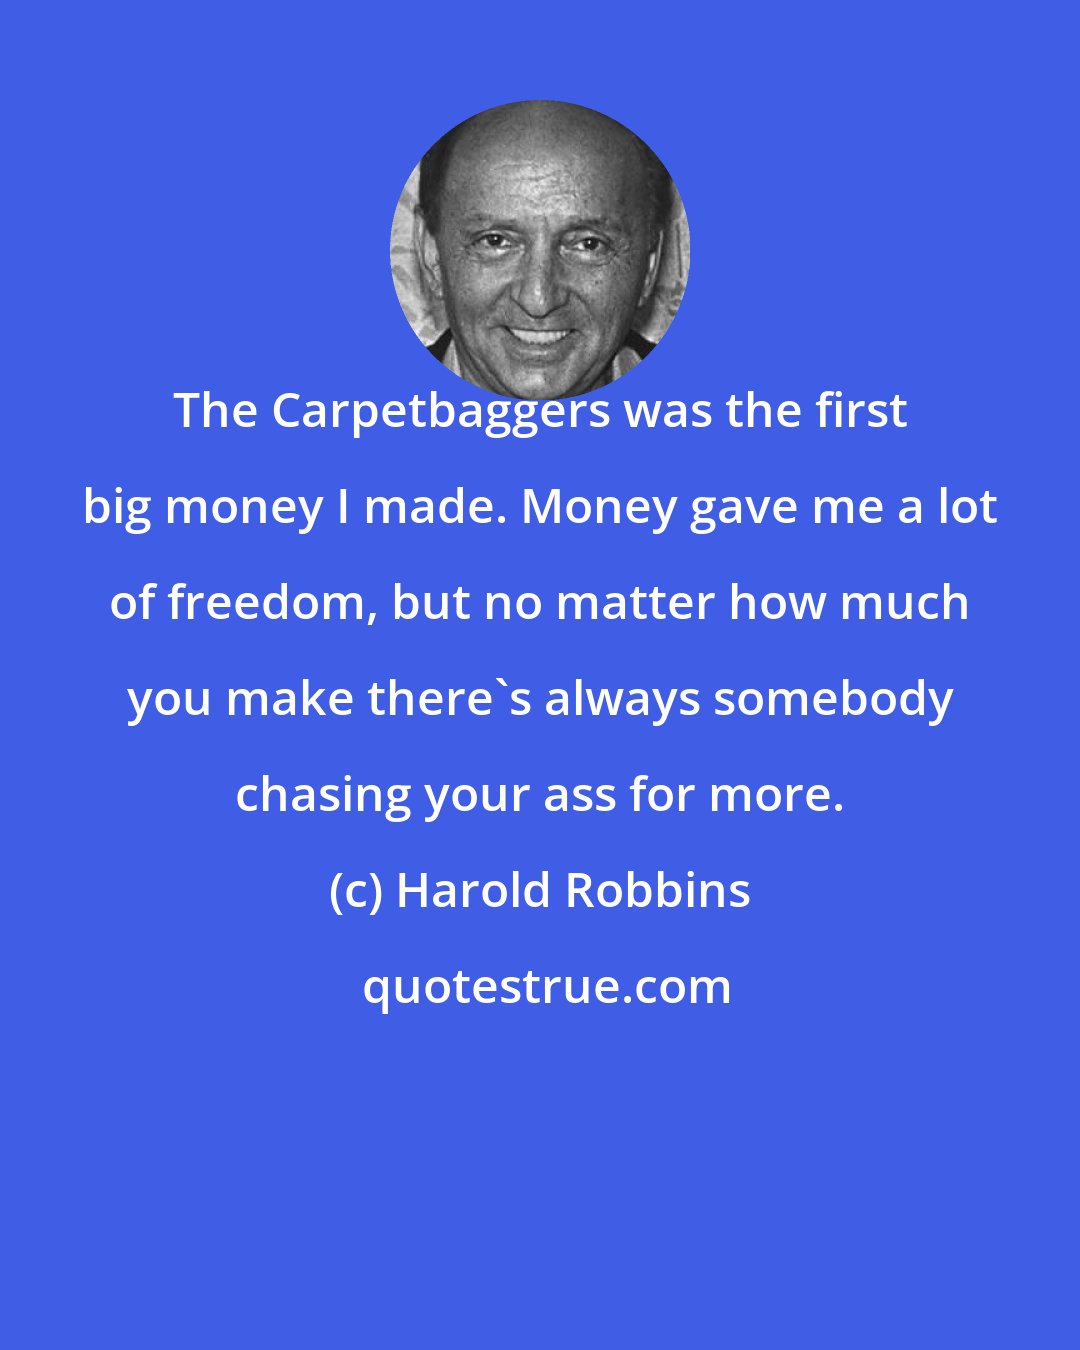 Harold Robbins: The Carpetbaggers was the first big money I made. Money gave me a lot of freedom, but no matter how much you make there's always somebody chasing your ass for more.